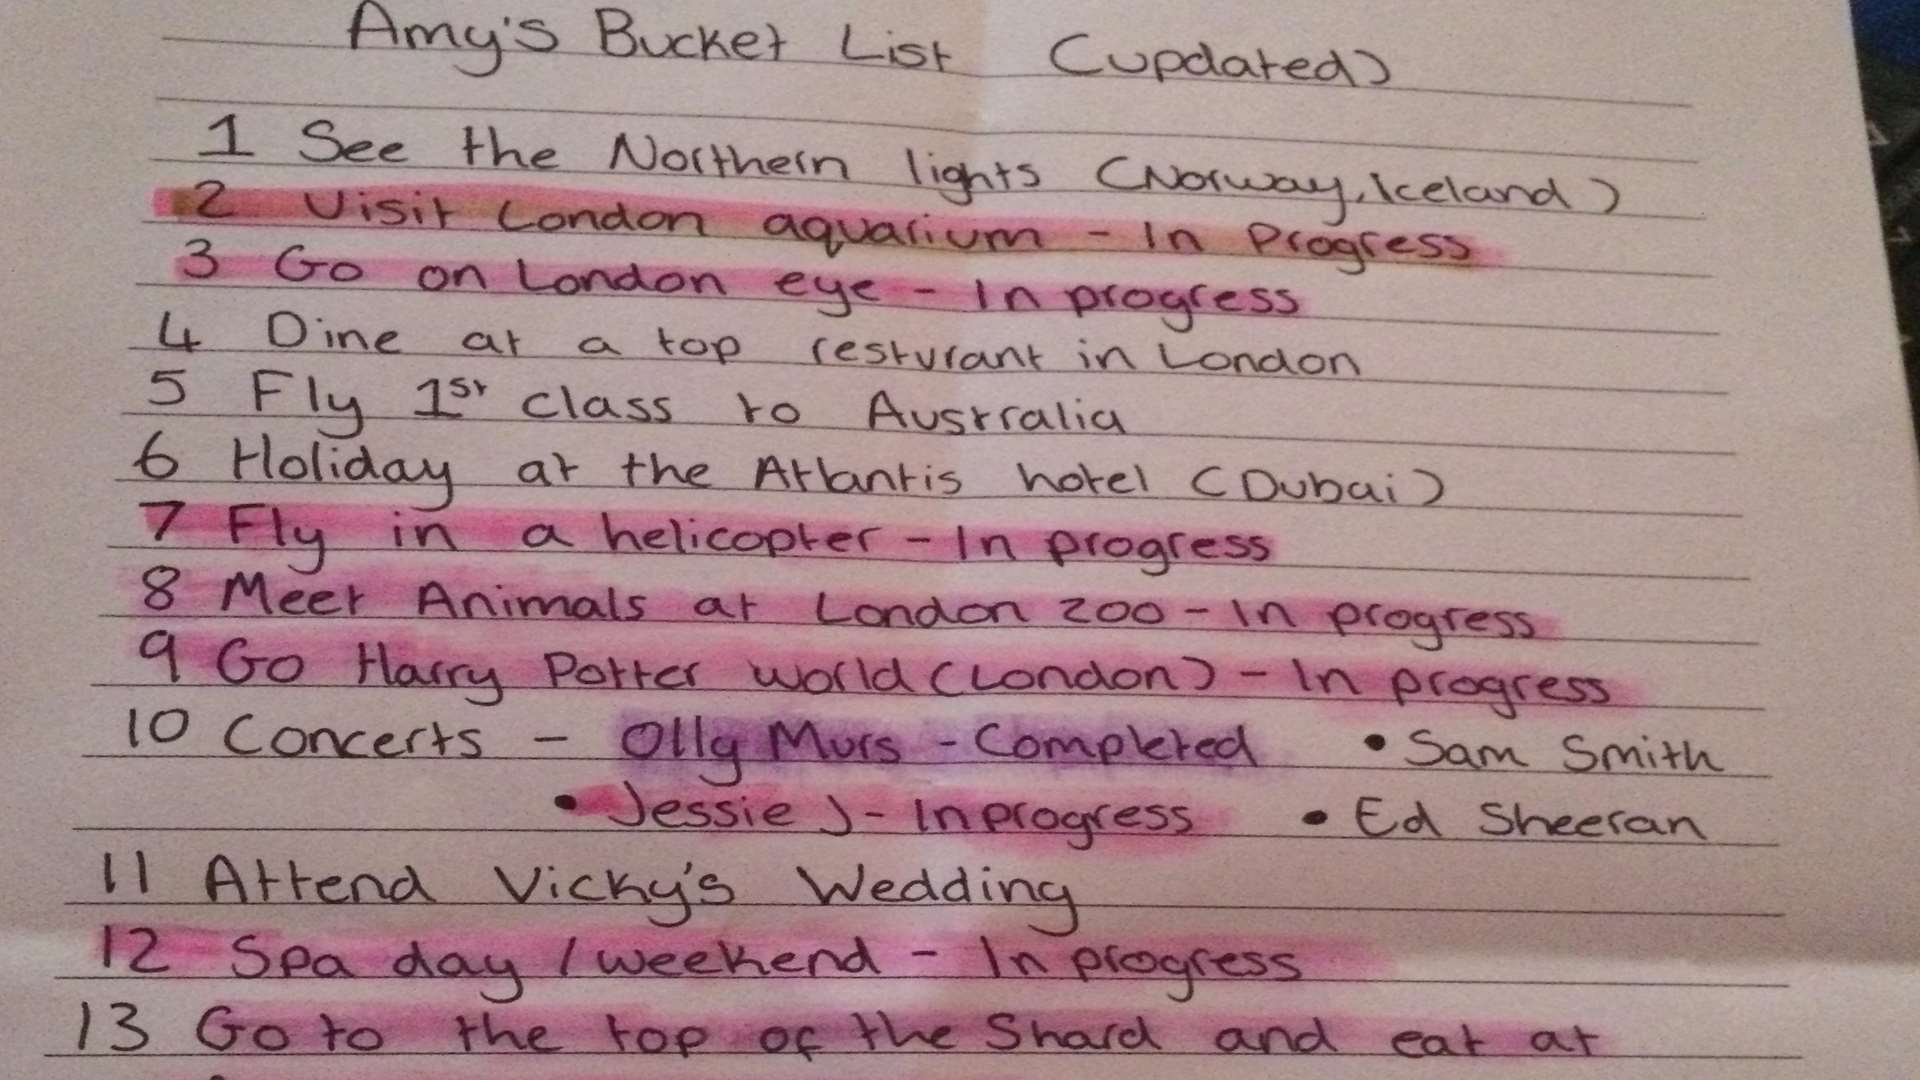 Her bucket list contains a first-class trip to Australia and watching X-Factor live